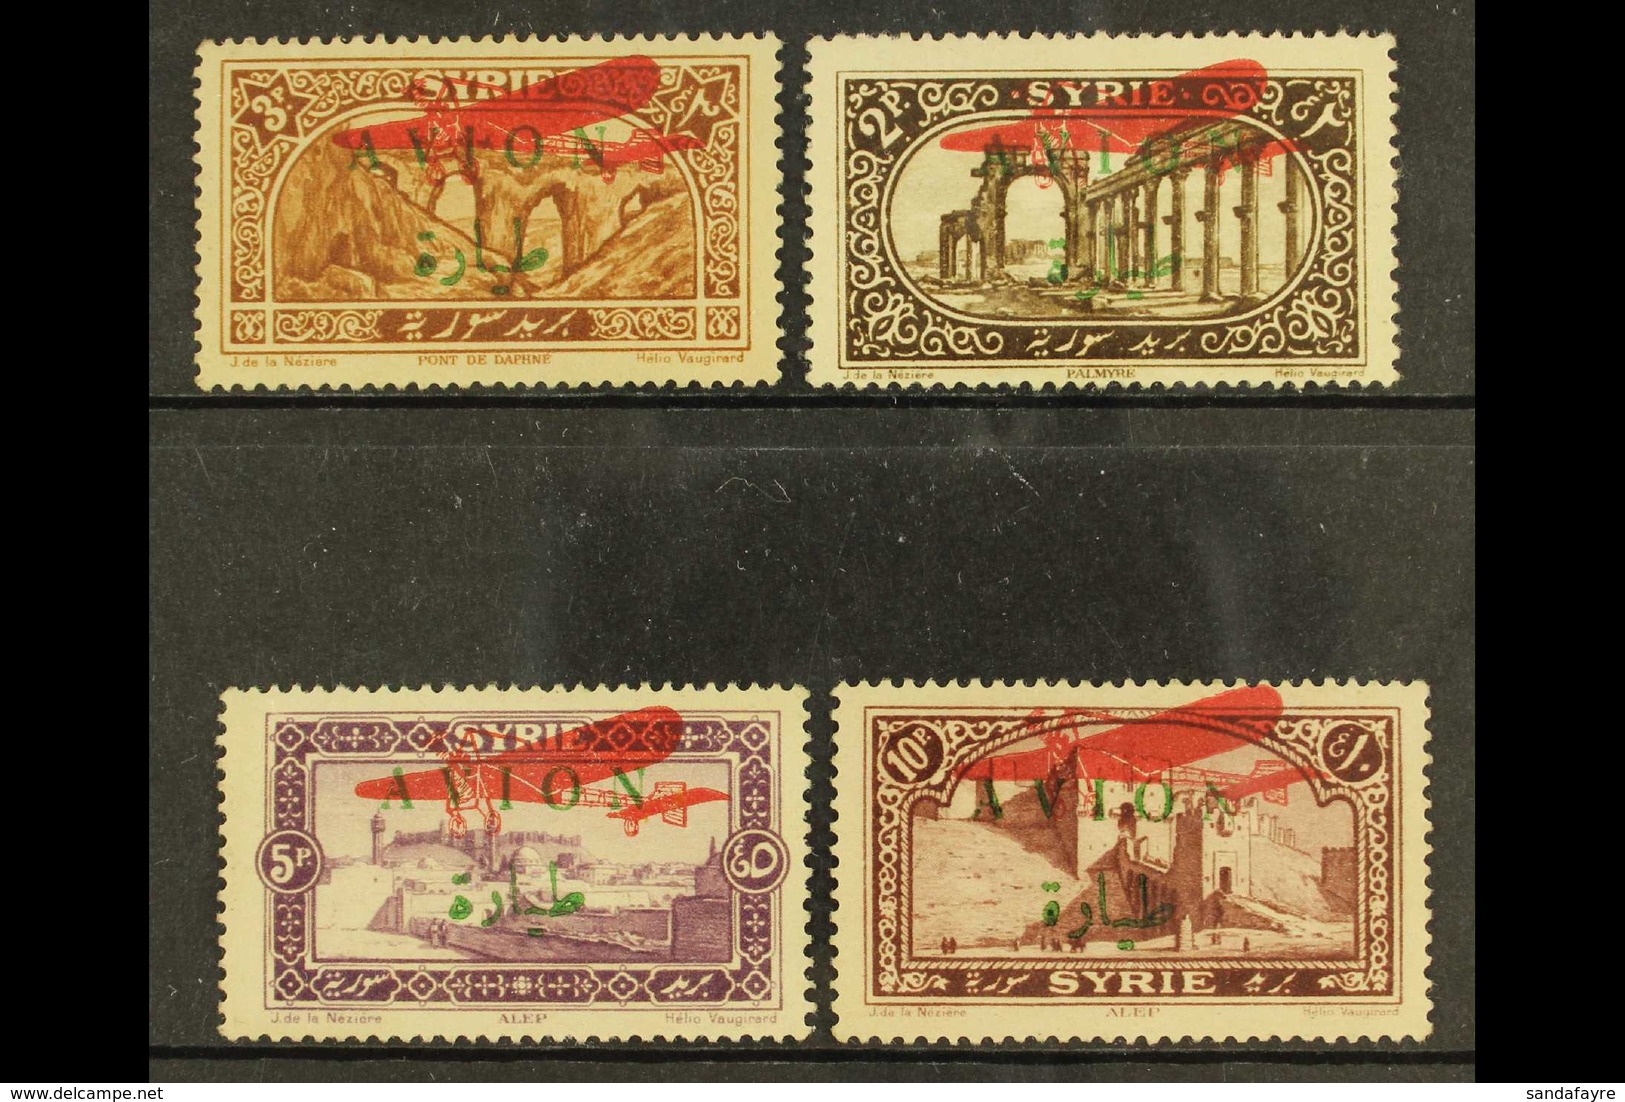 1925 AIRS WITH 1926 OVERPRINTS. 1925 Complete Set With "AVION" Opt In Green, With Additional 1926 Aeroplane Opt In Red,  - Syria